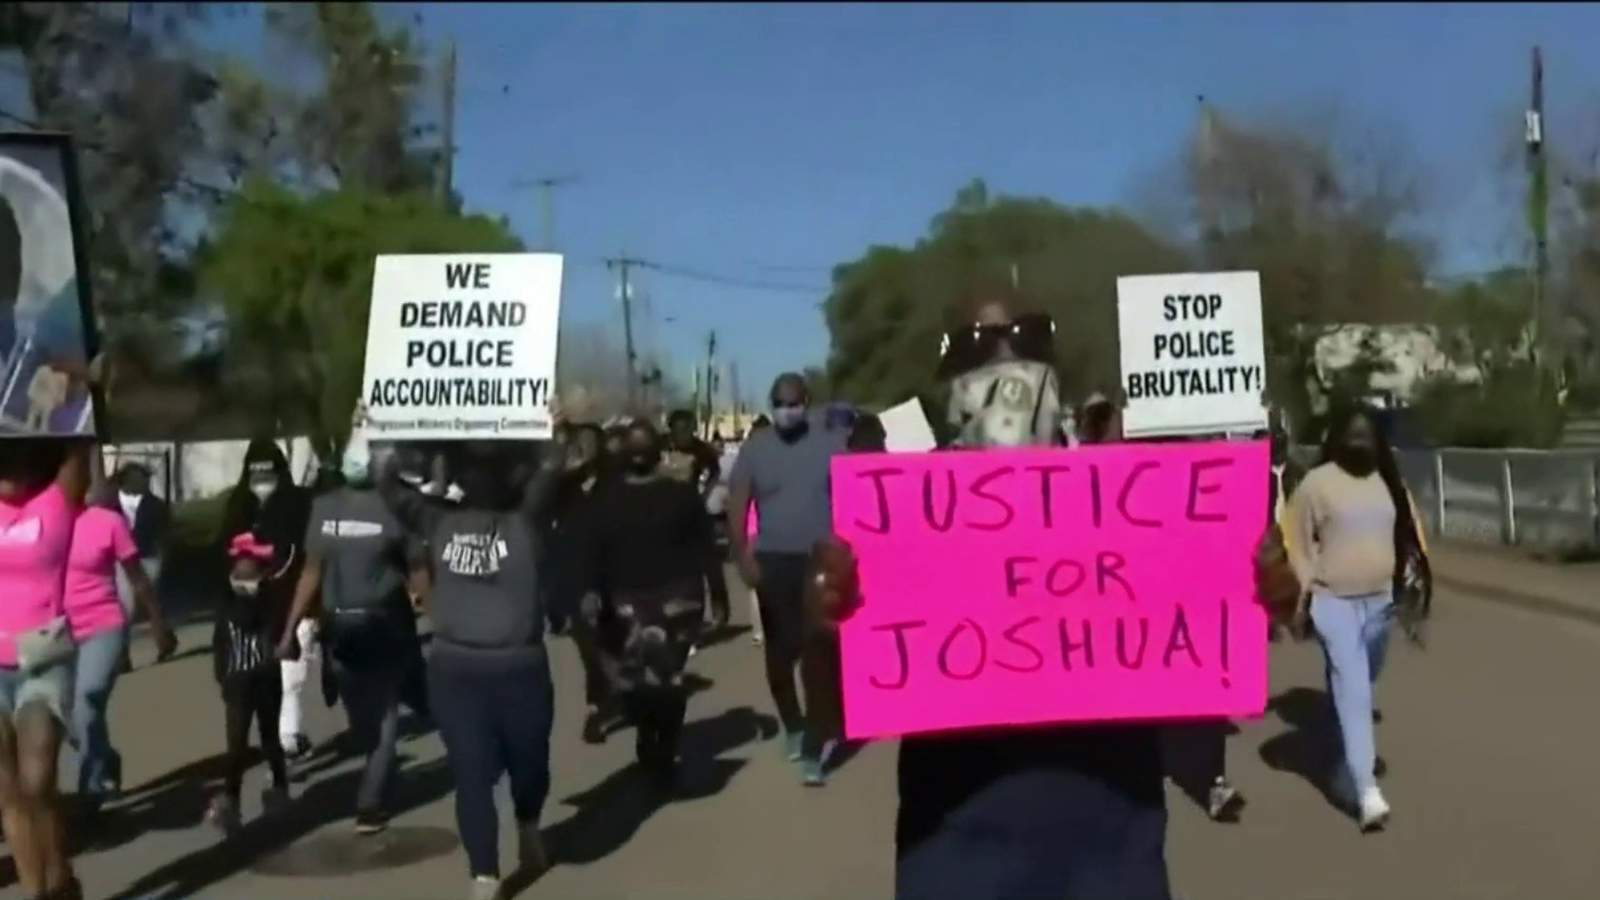 Family demands justice for Joshua Feast; Demonstrators march to La Marque Police Dept.